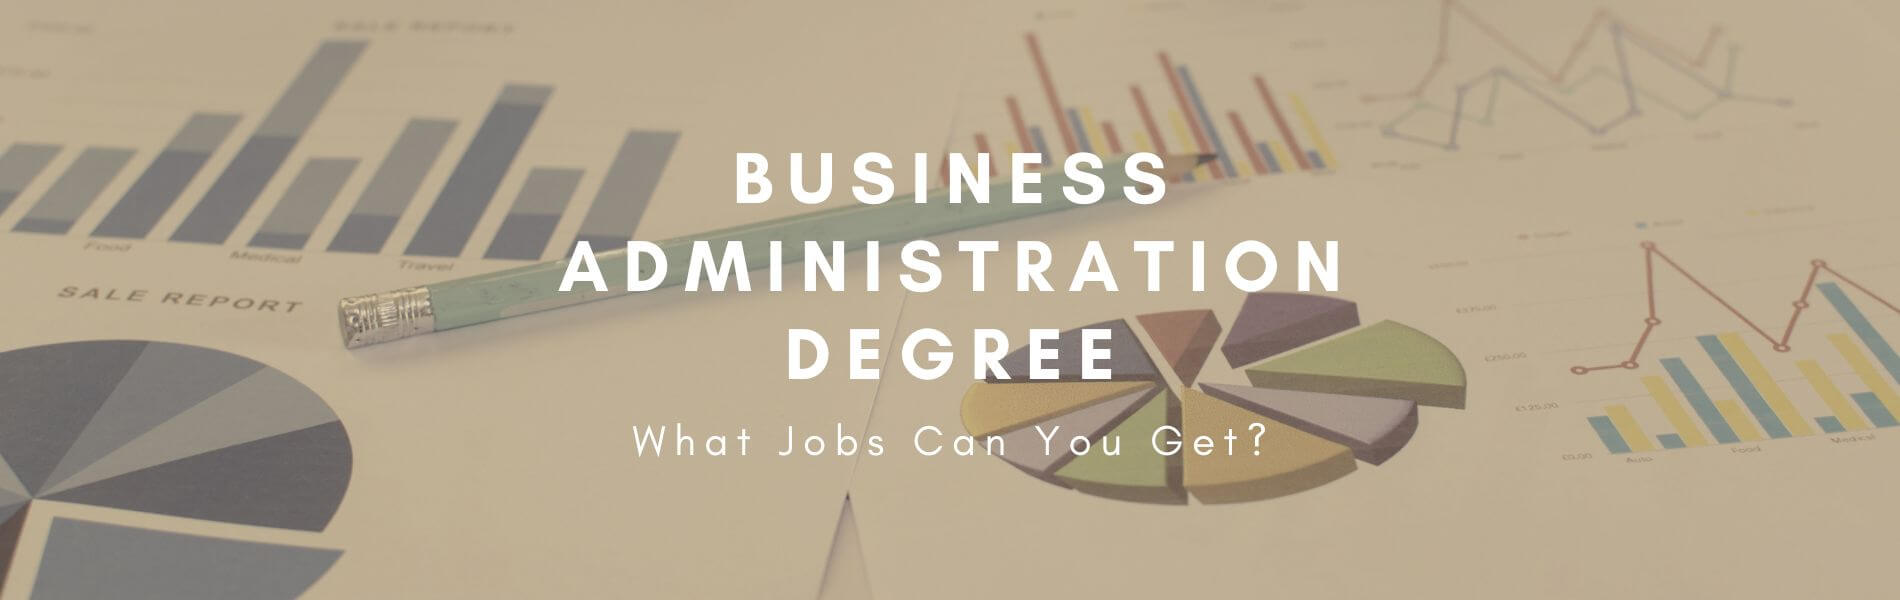 what jobs can you get with a business administration degree